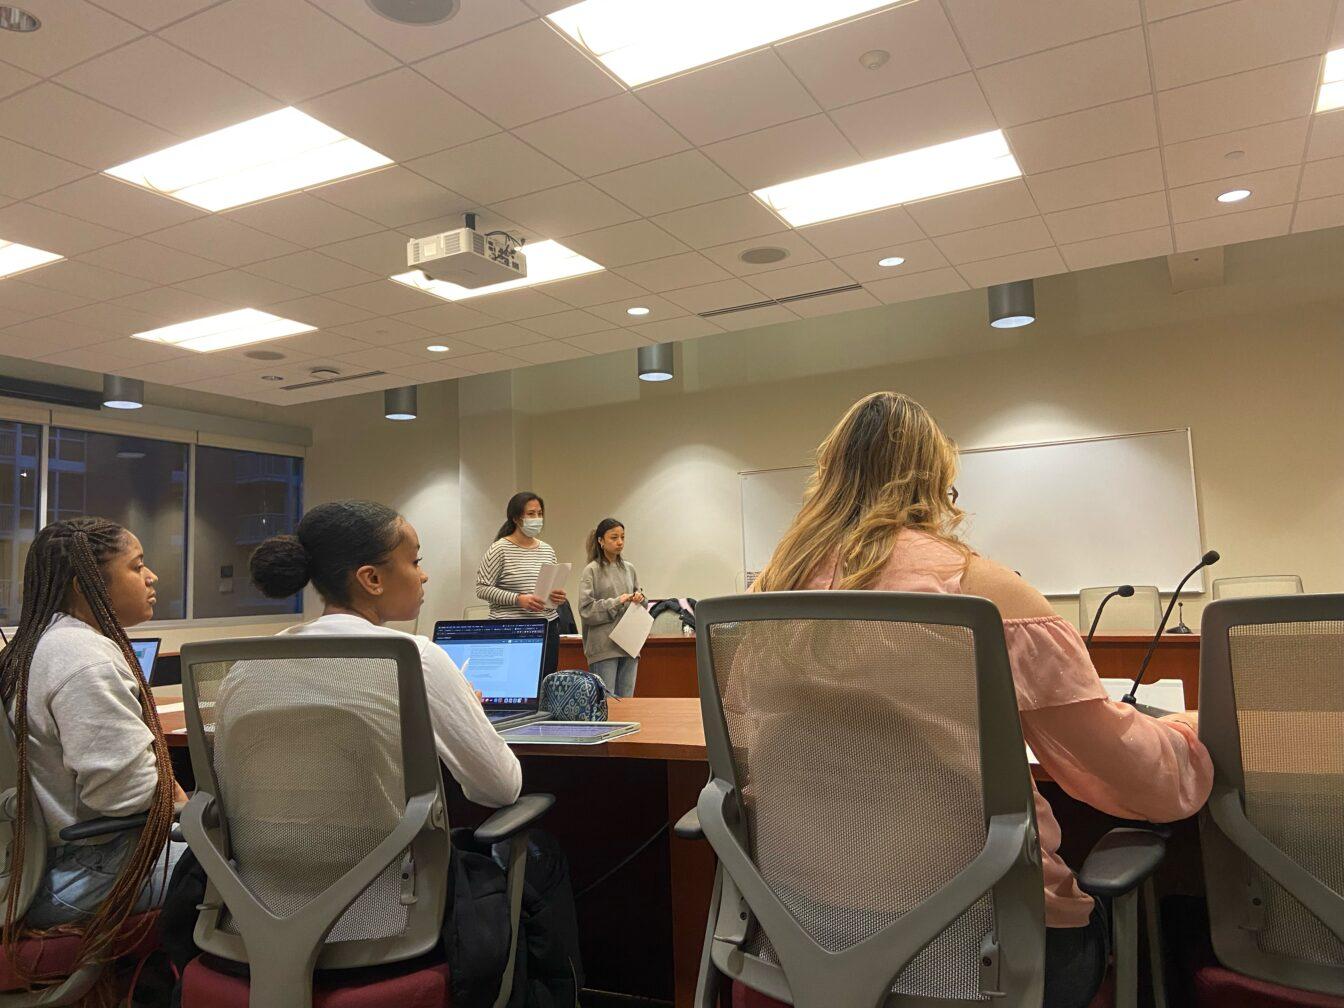 Grant Allocation Committee discusses event funding, travel grants for campus RSOs